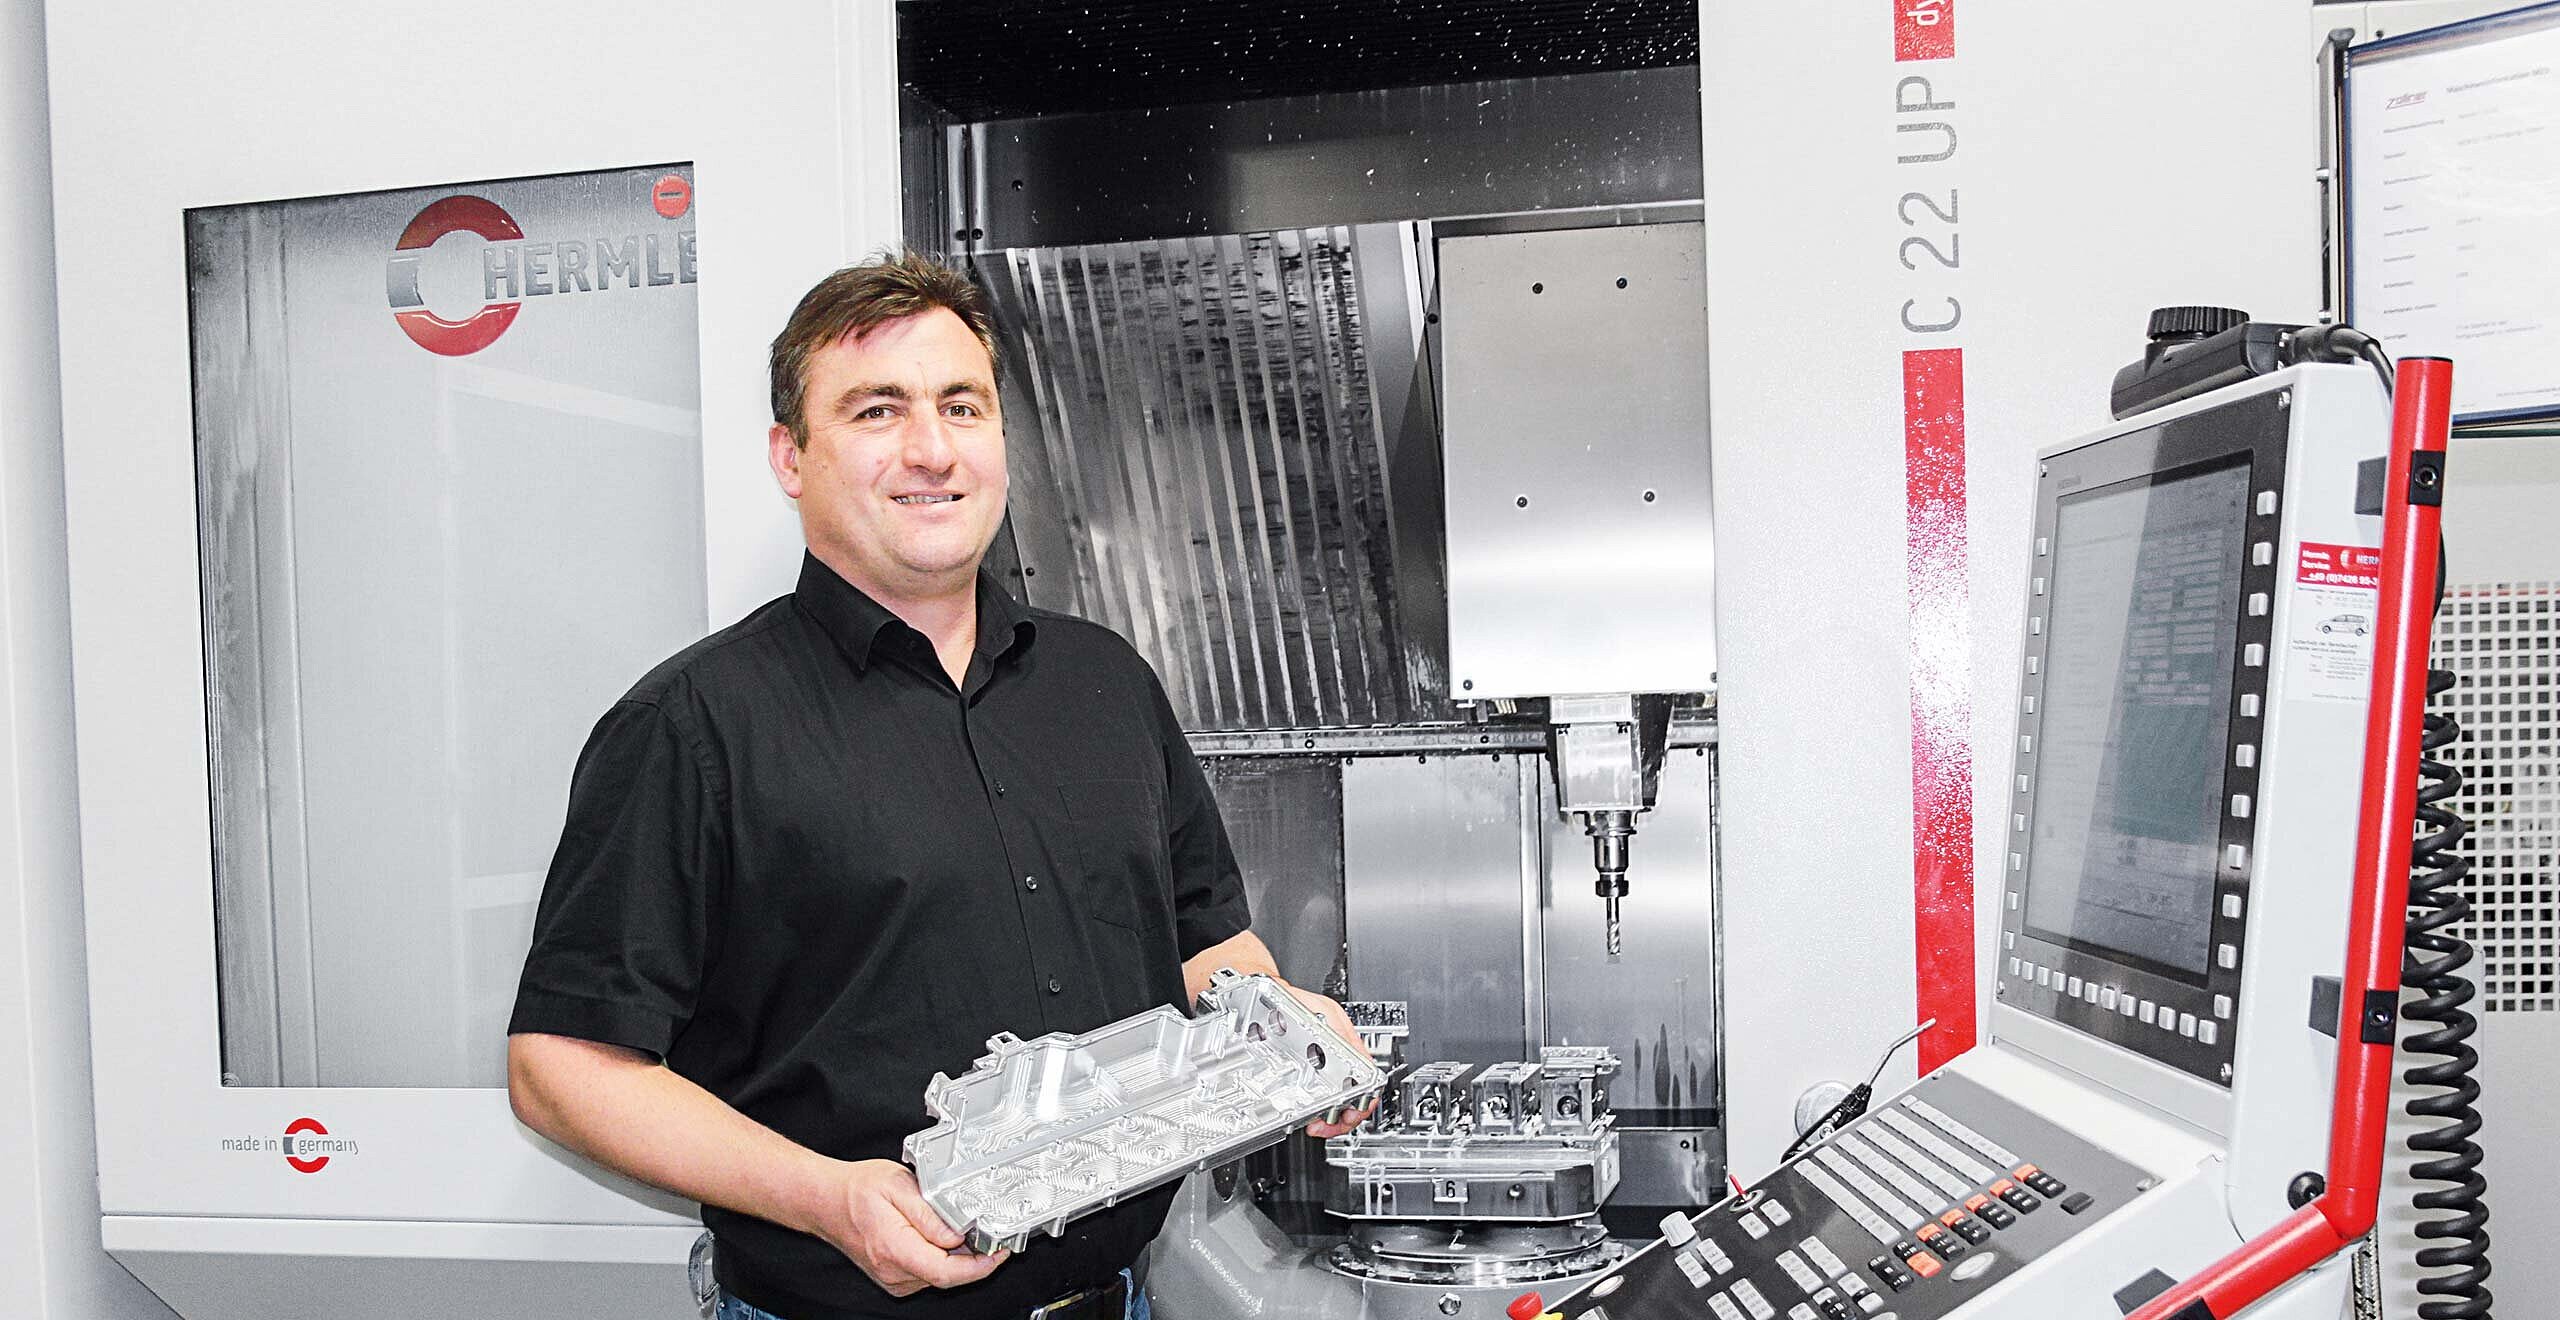 Johann Dietl, Head of the Mechanics Division at Zollner Elektronik AG at the main Zandt plant in front of the compact C 22 UP machining centre machining area